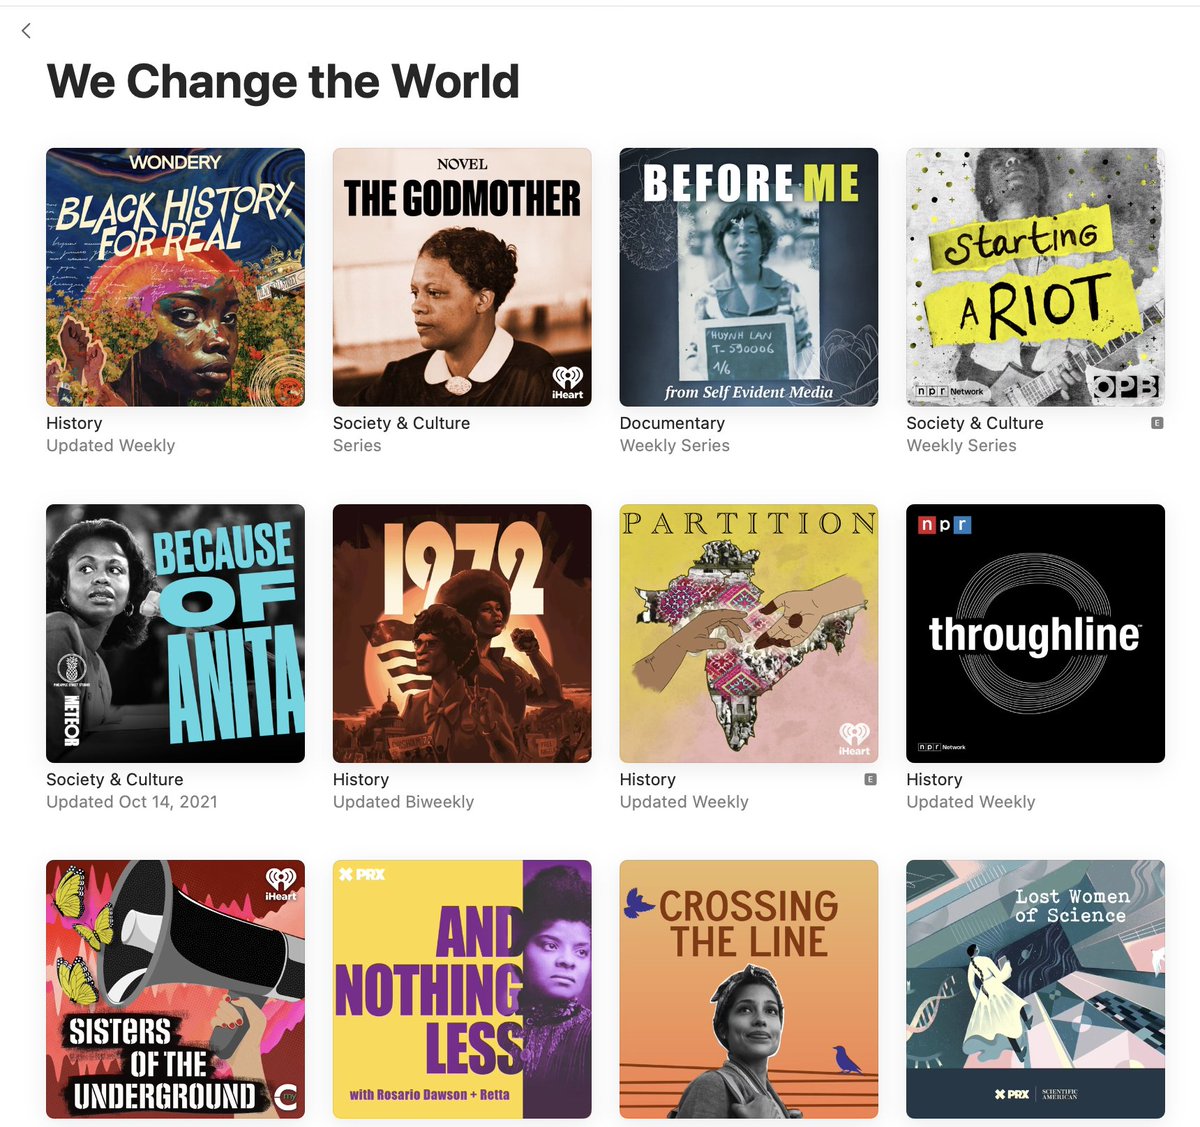 You know it's a good day when Apple Podcasts puts your show on the list of women 'who change the world.' So proud of ctlpod.com We know we made an impact. Thanks to @LaylaHoushmand, @PartnersClinic, @GynAndTonic and all those who shared their stories!